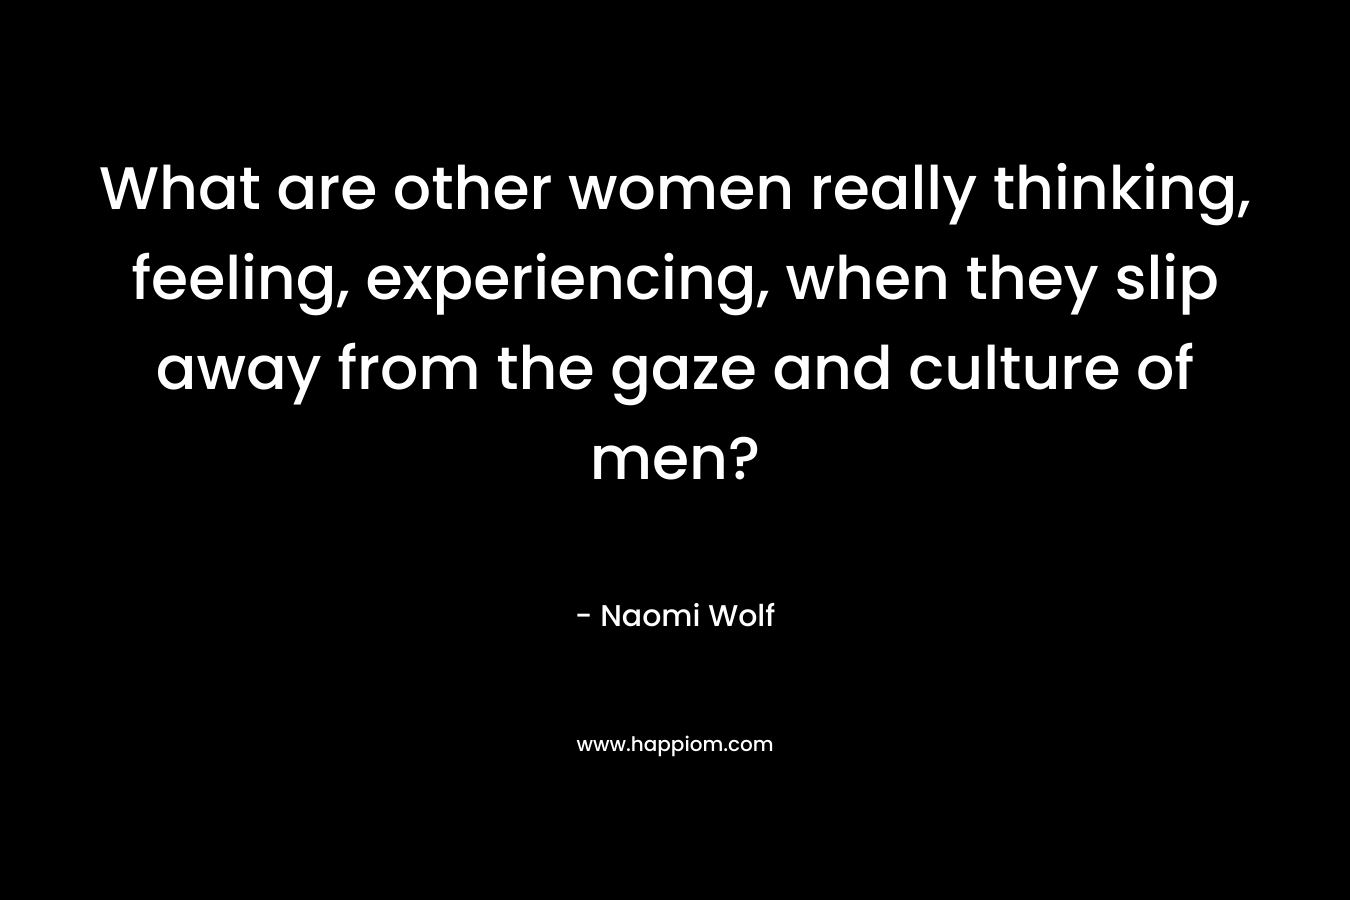 What are other women really thinking, feeling, experiencing, when they slip away from the gaze and culture of men?